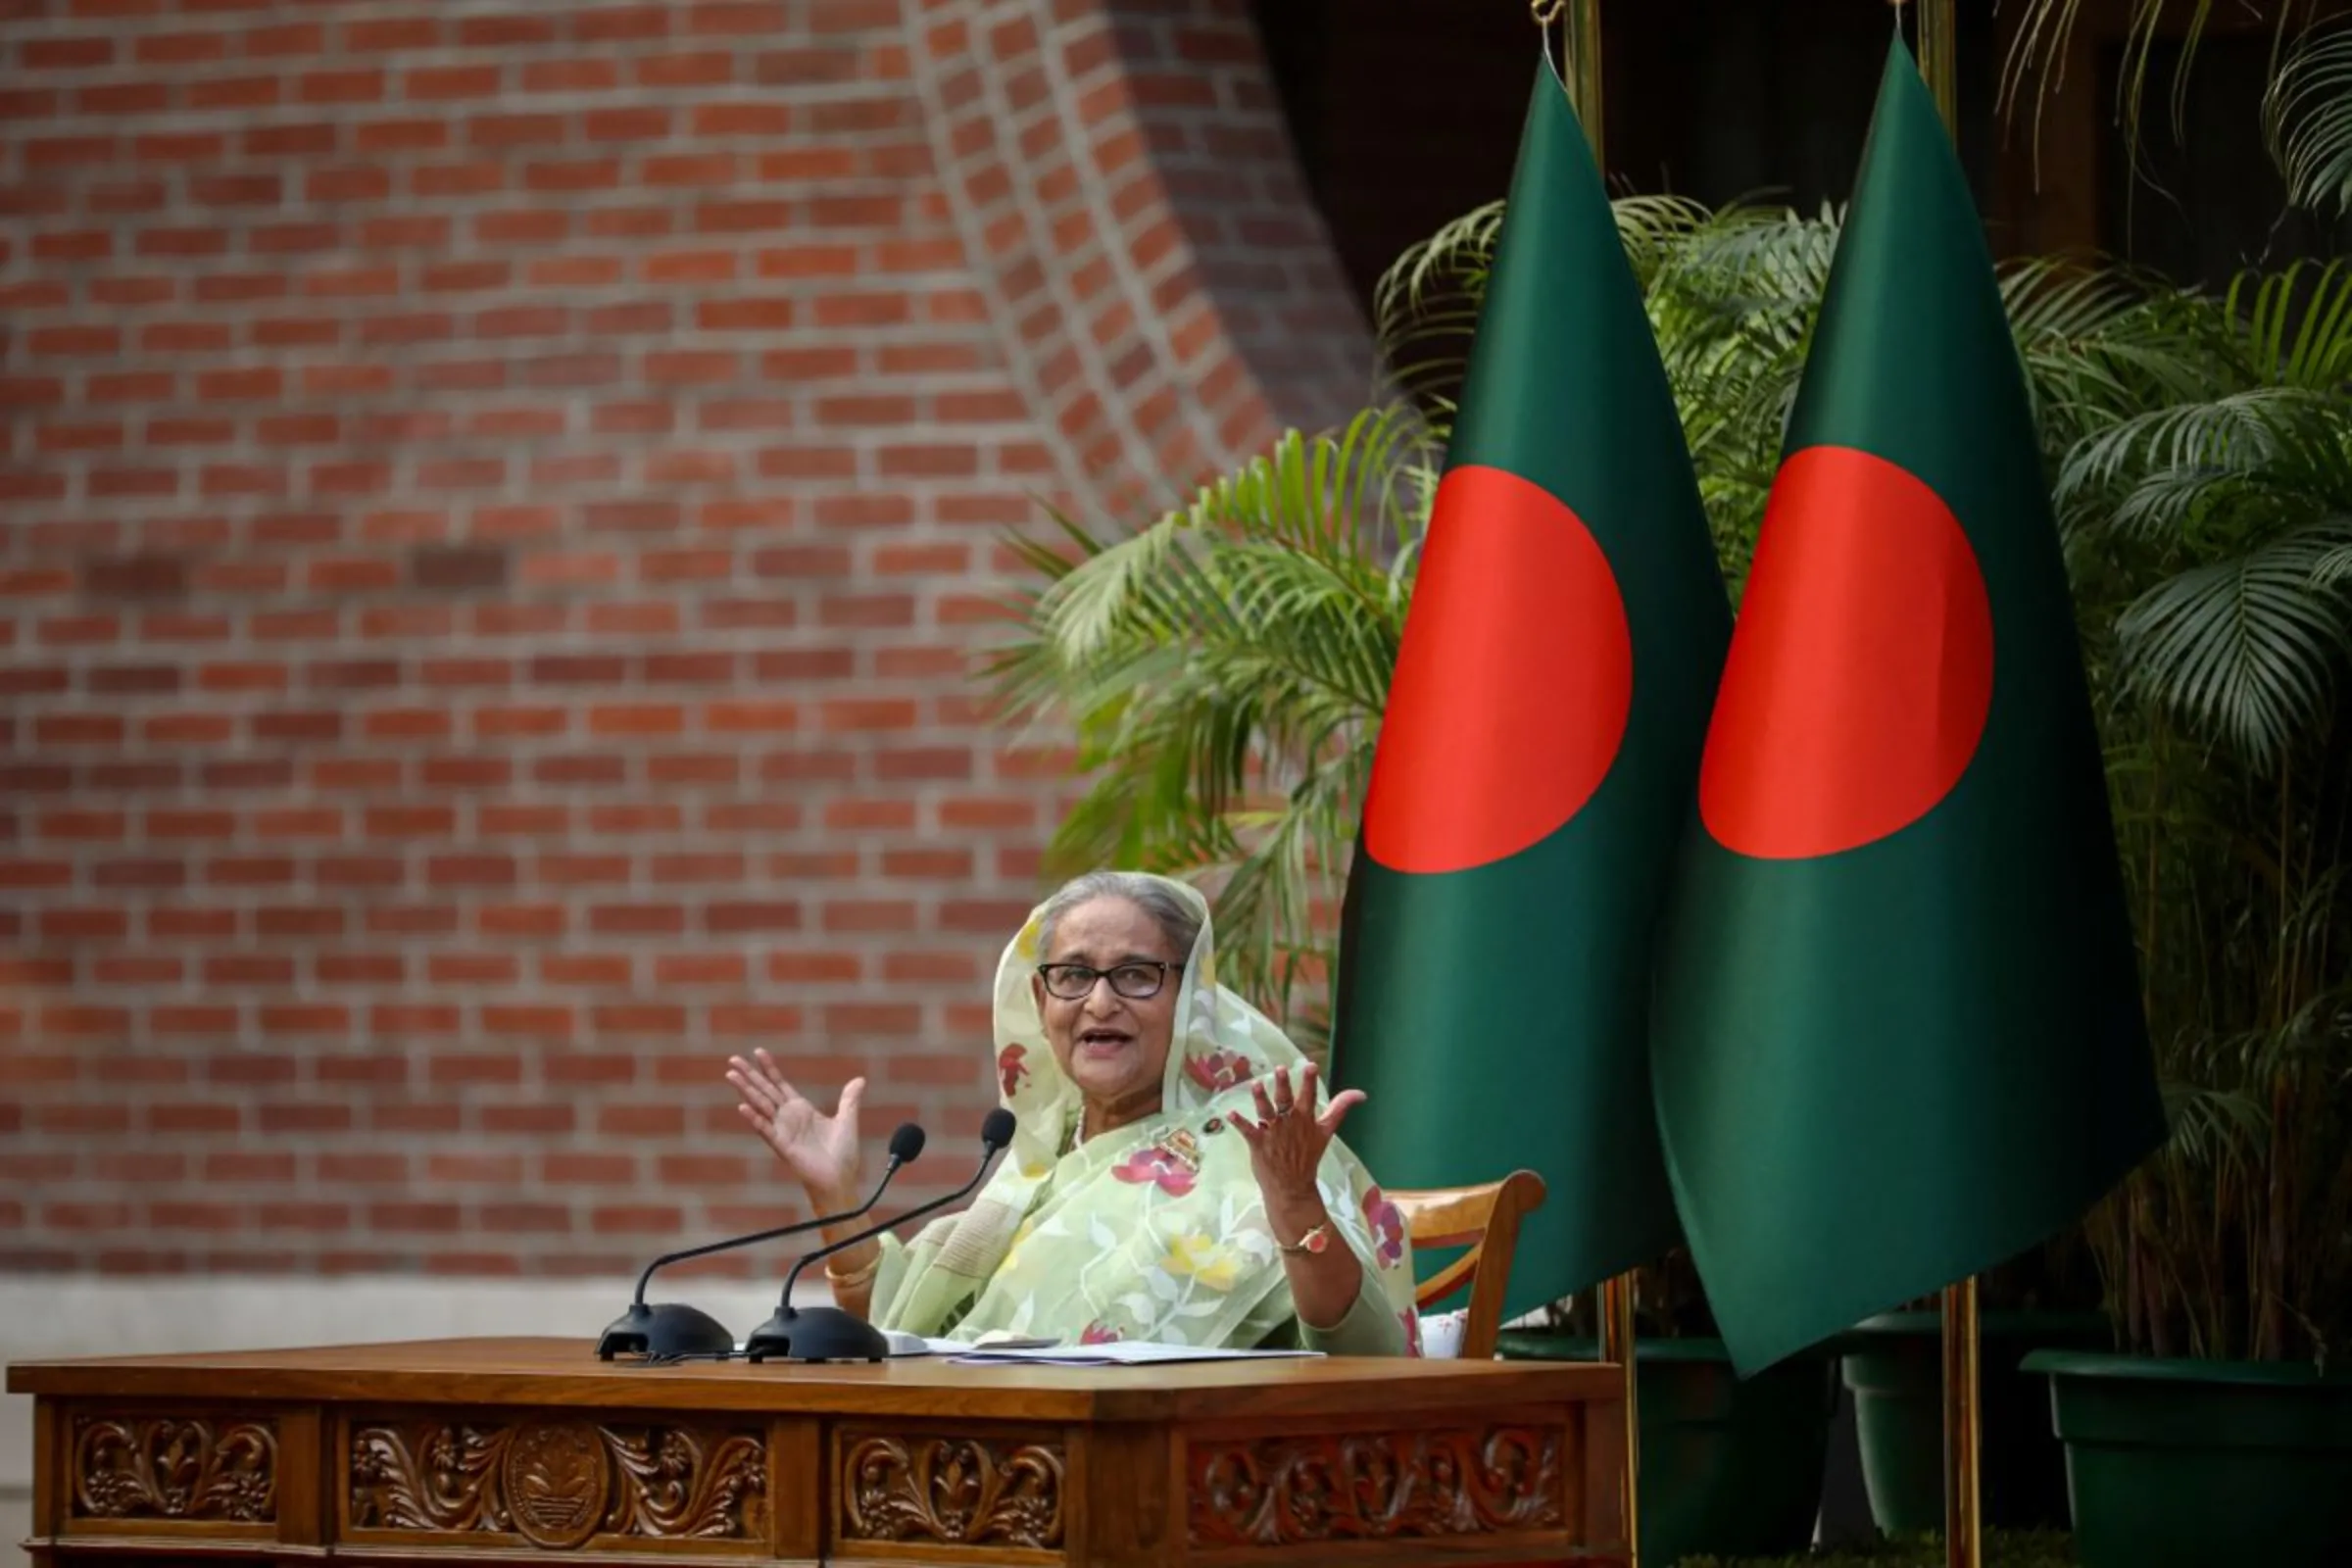 Sheikh Hasina, the newly elected Prime Minister of Bangladesh and Chairperson of Bangladesh Awami League, gestures during a meeting with foreign observers and journalists at the Prime Minister's residence in Dhaka, Bangladesh, January 8, 2024. REUTERS/Mohammad Ponir Hossain